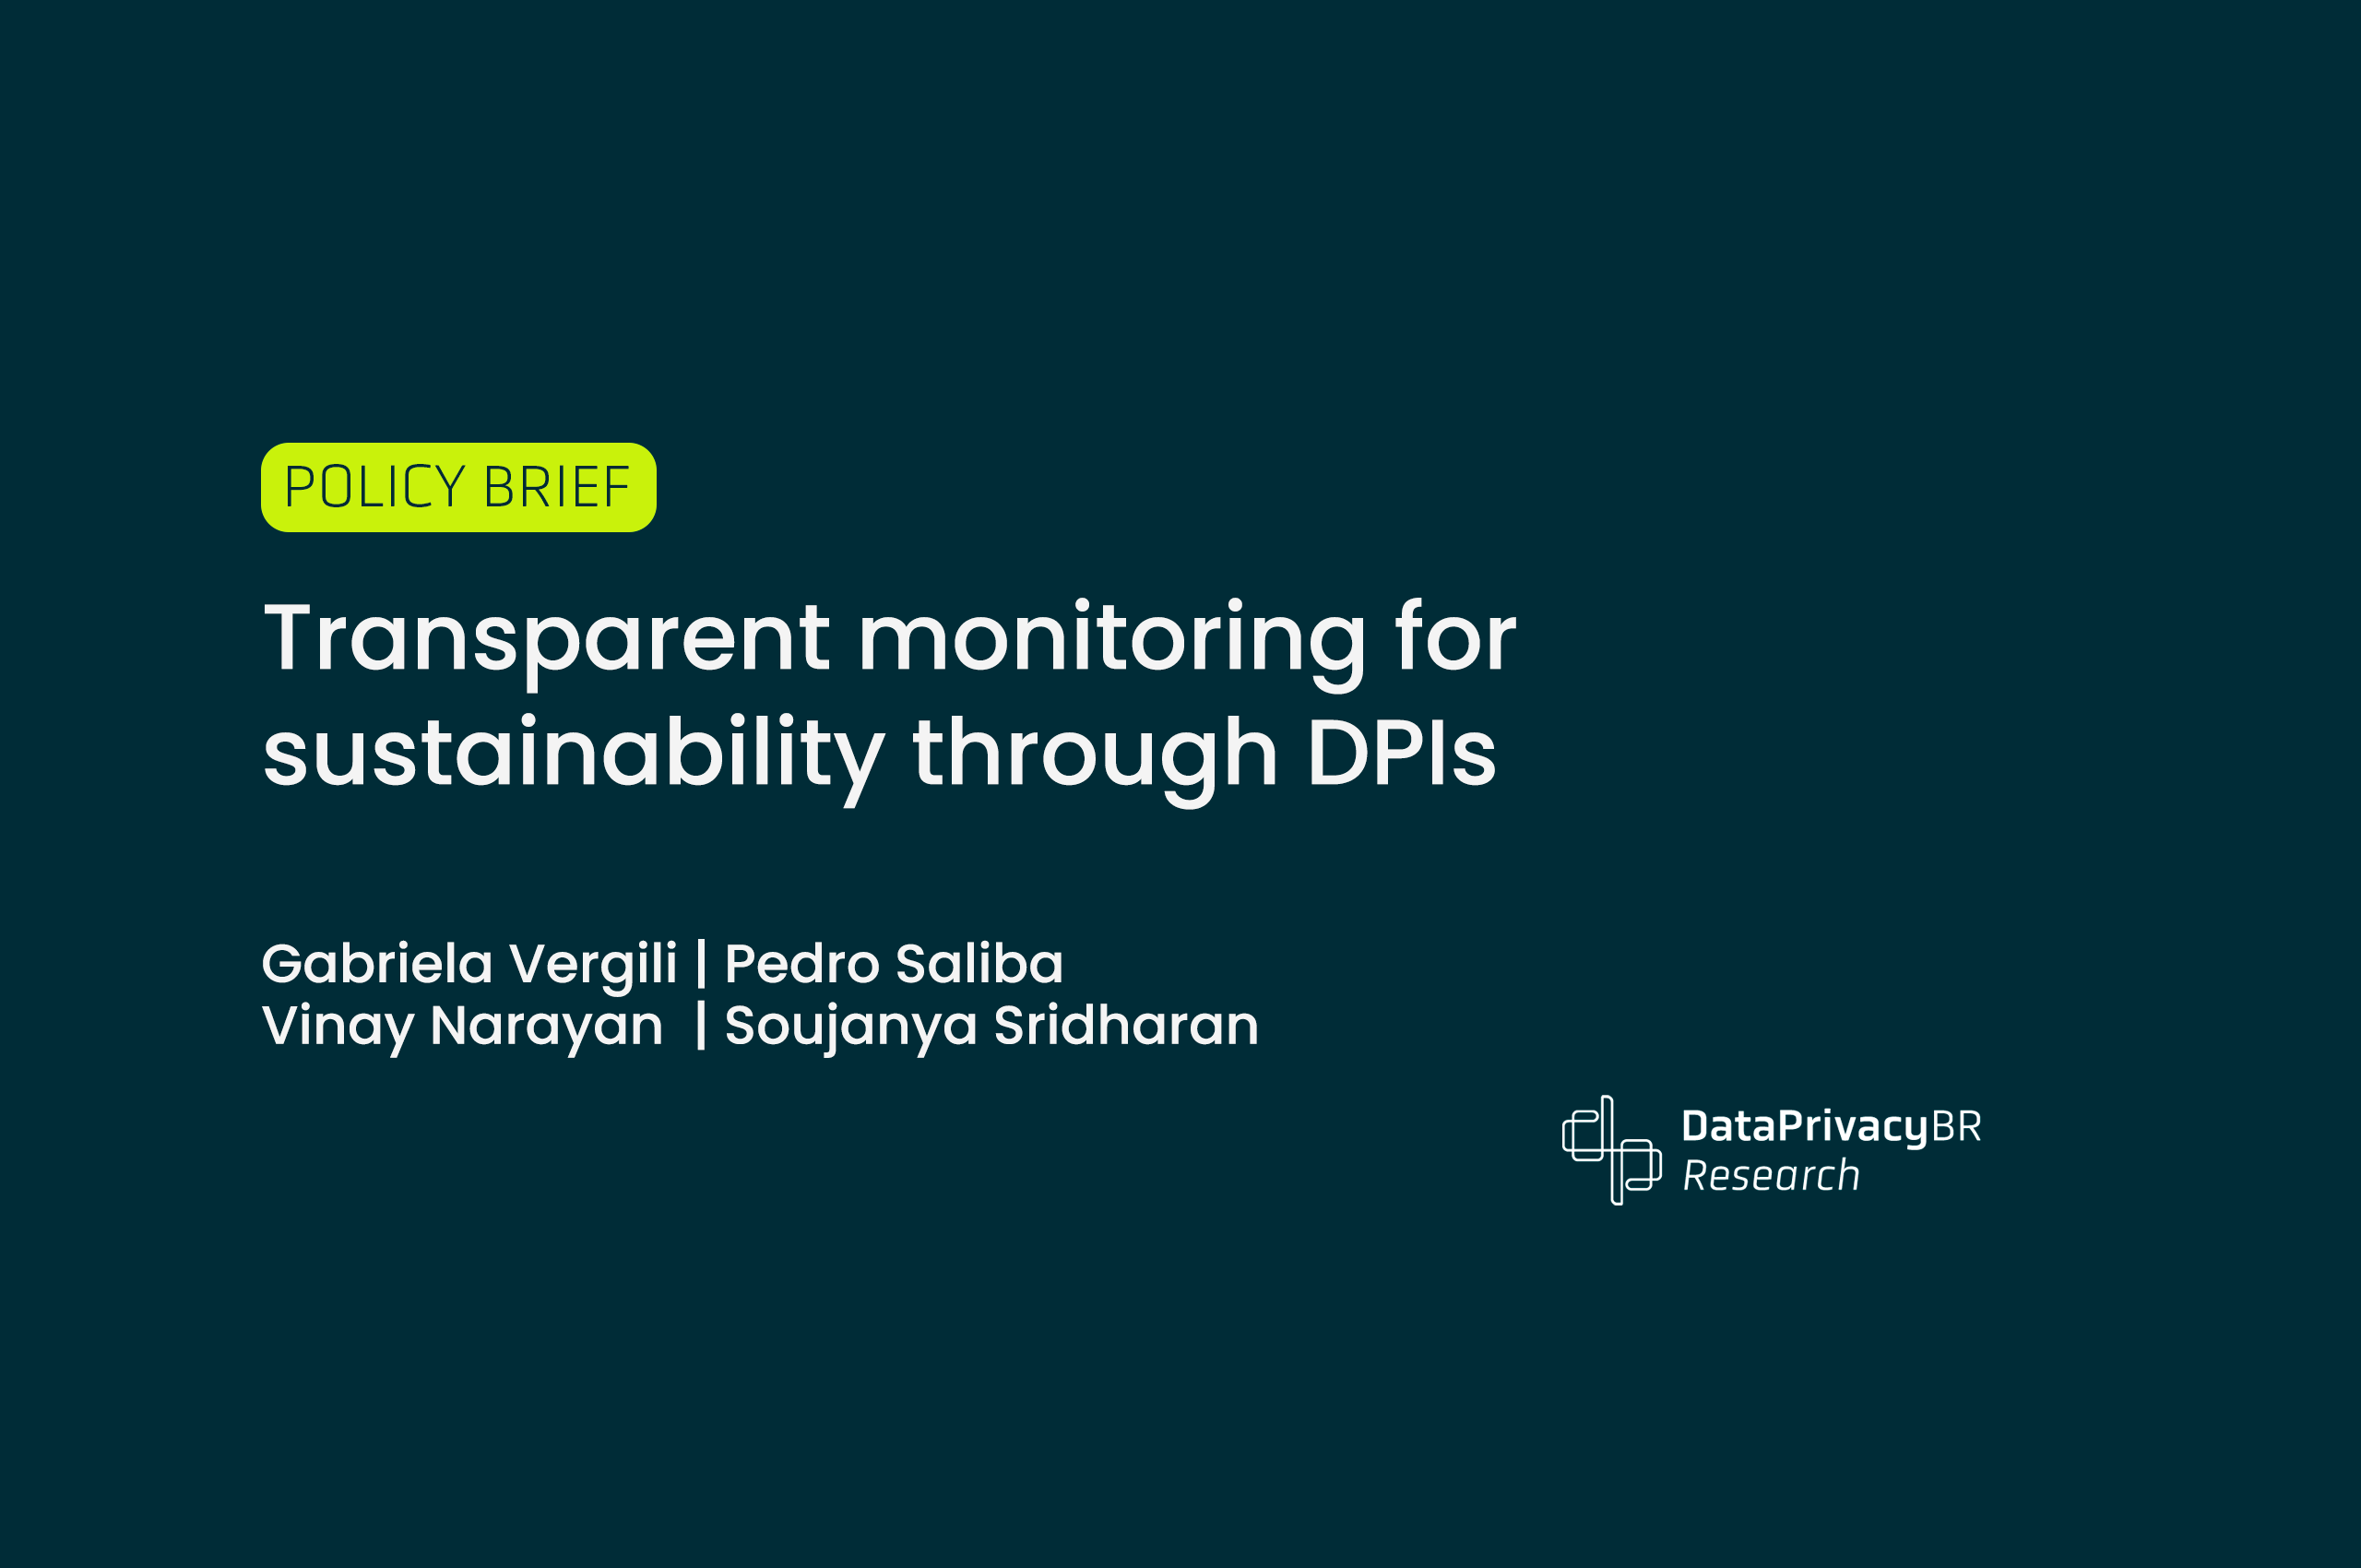 http://Transparent%20monitoring%20for%20sustainability%20through%20DPIs